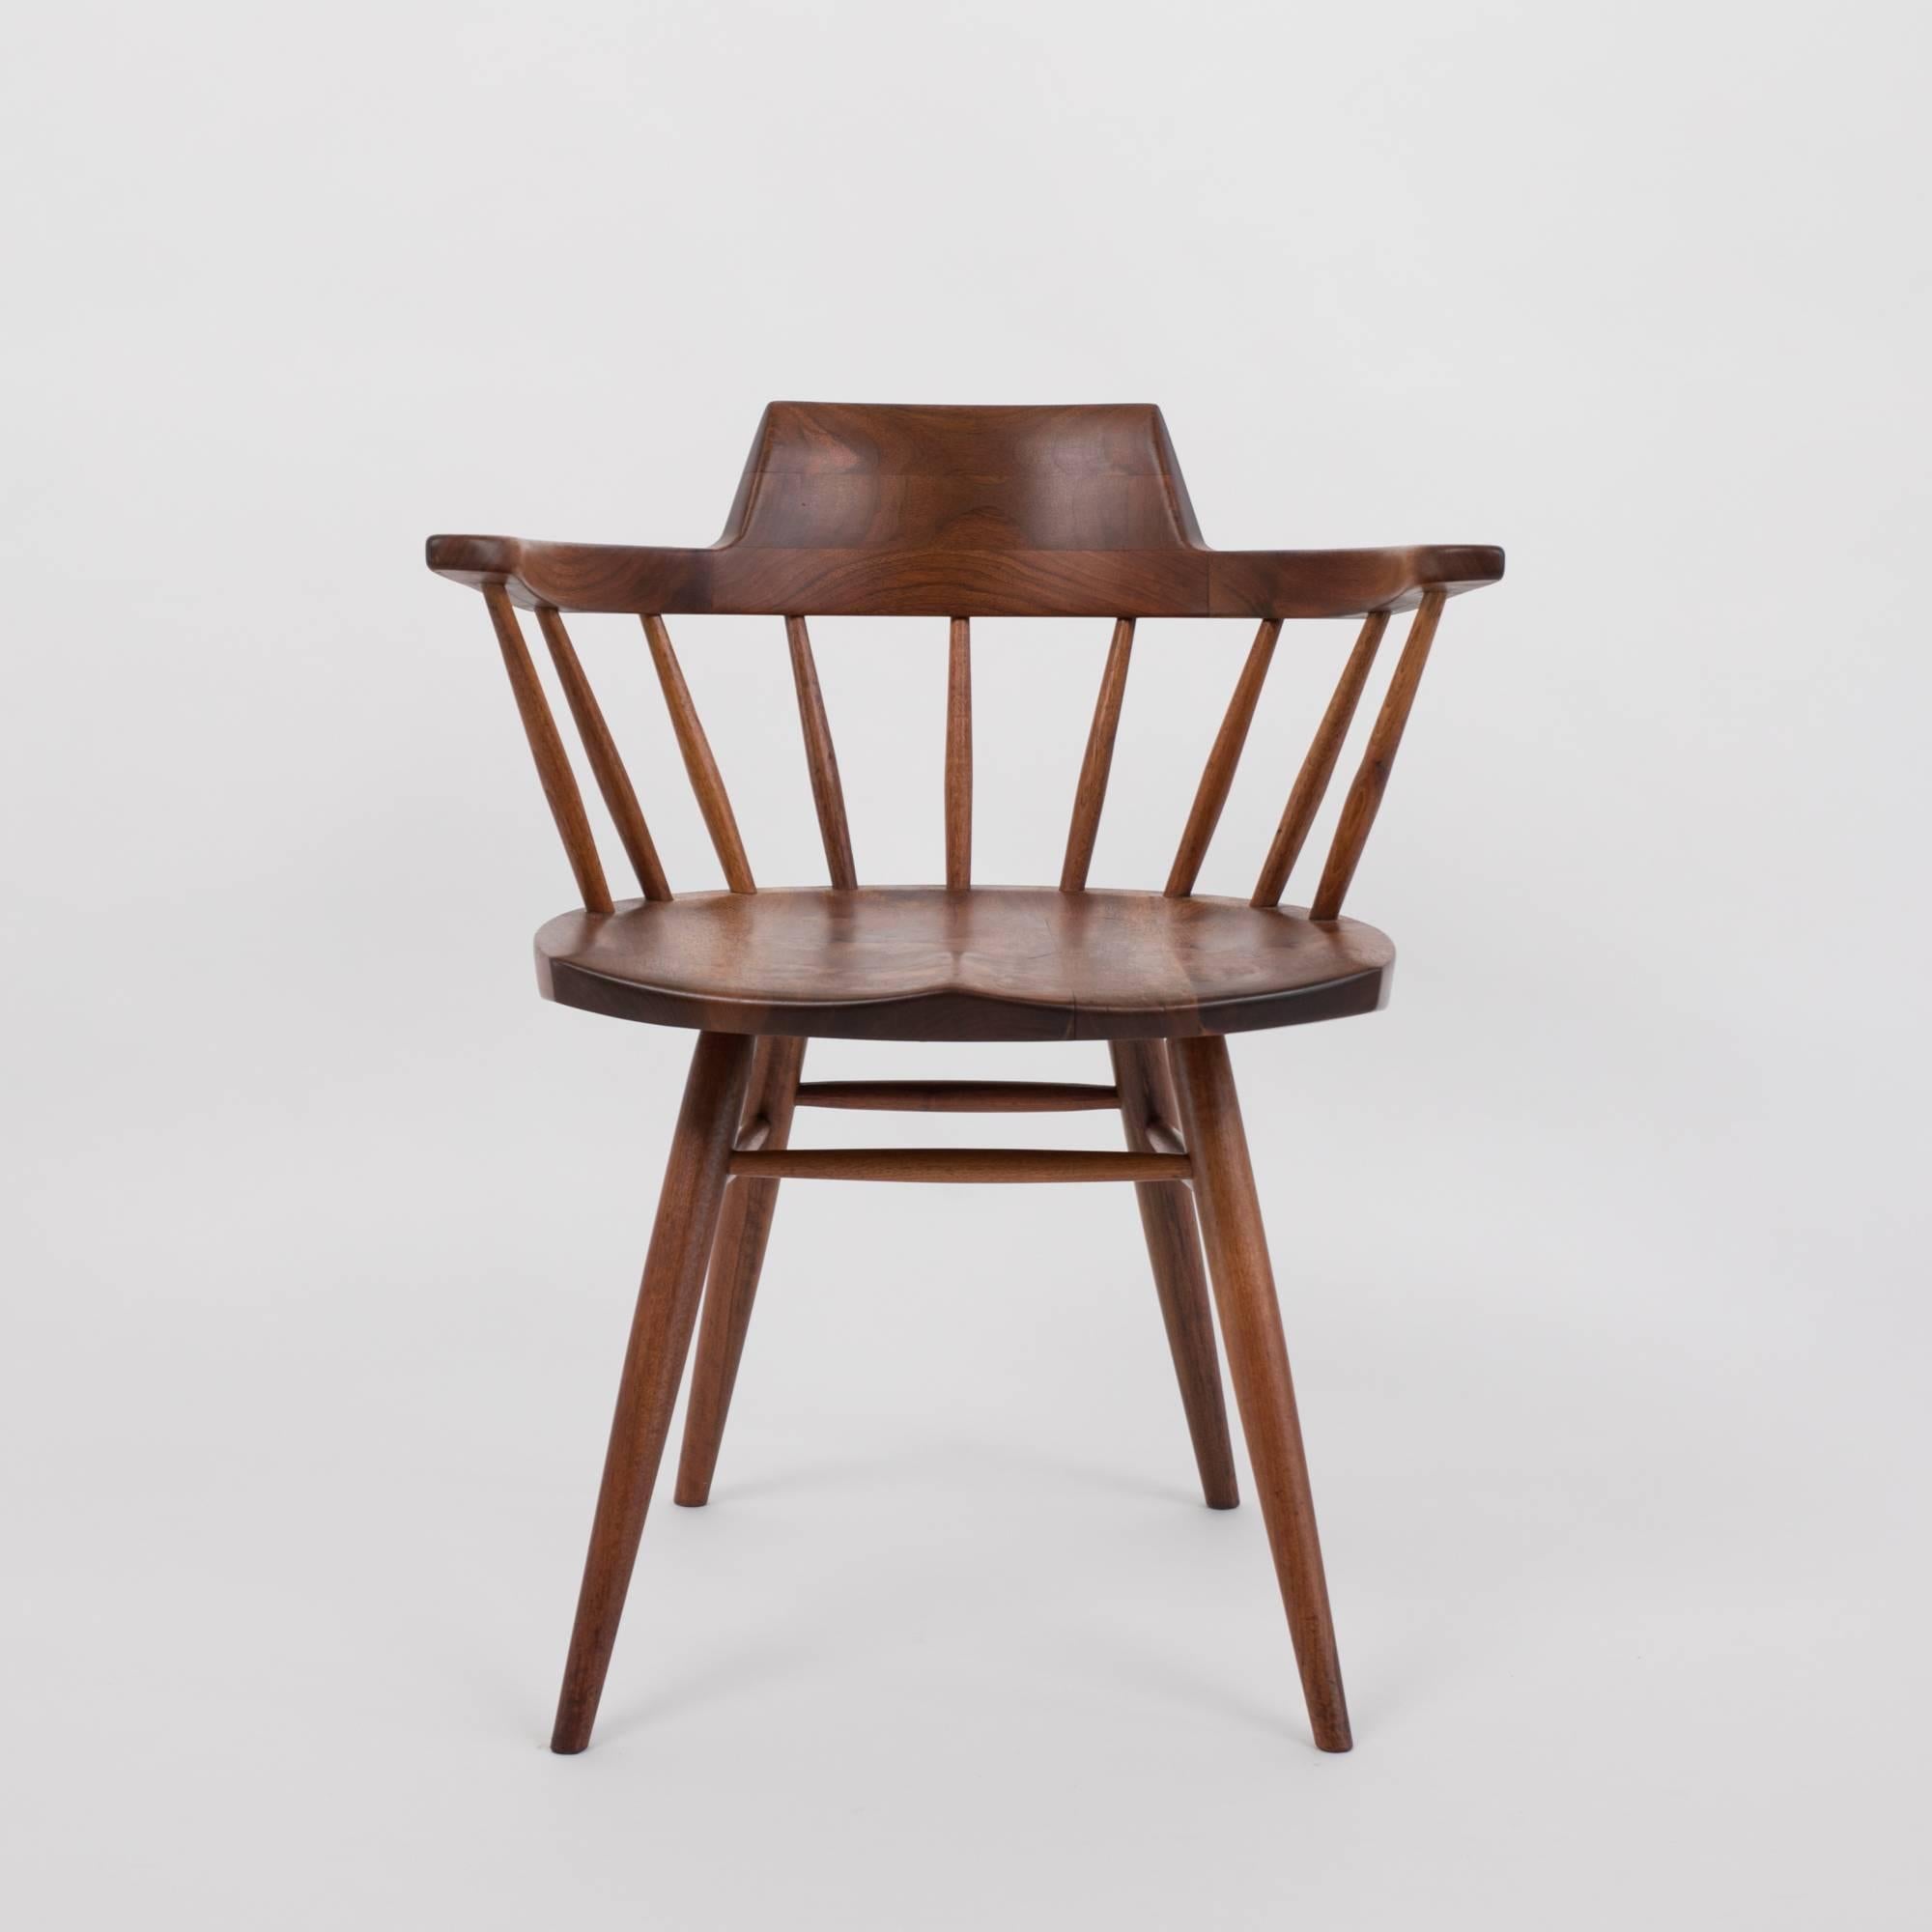 An accomplished example from American midcentury craftsman George Nakashima. The black walnut Captain chair has a curved, peaked backrest atop carved spindles. The seat is sculpted for comfort and sits on four tapered dowel legs, joined to the chair